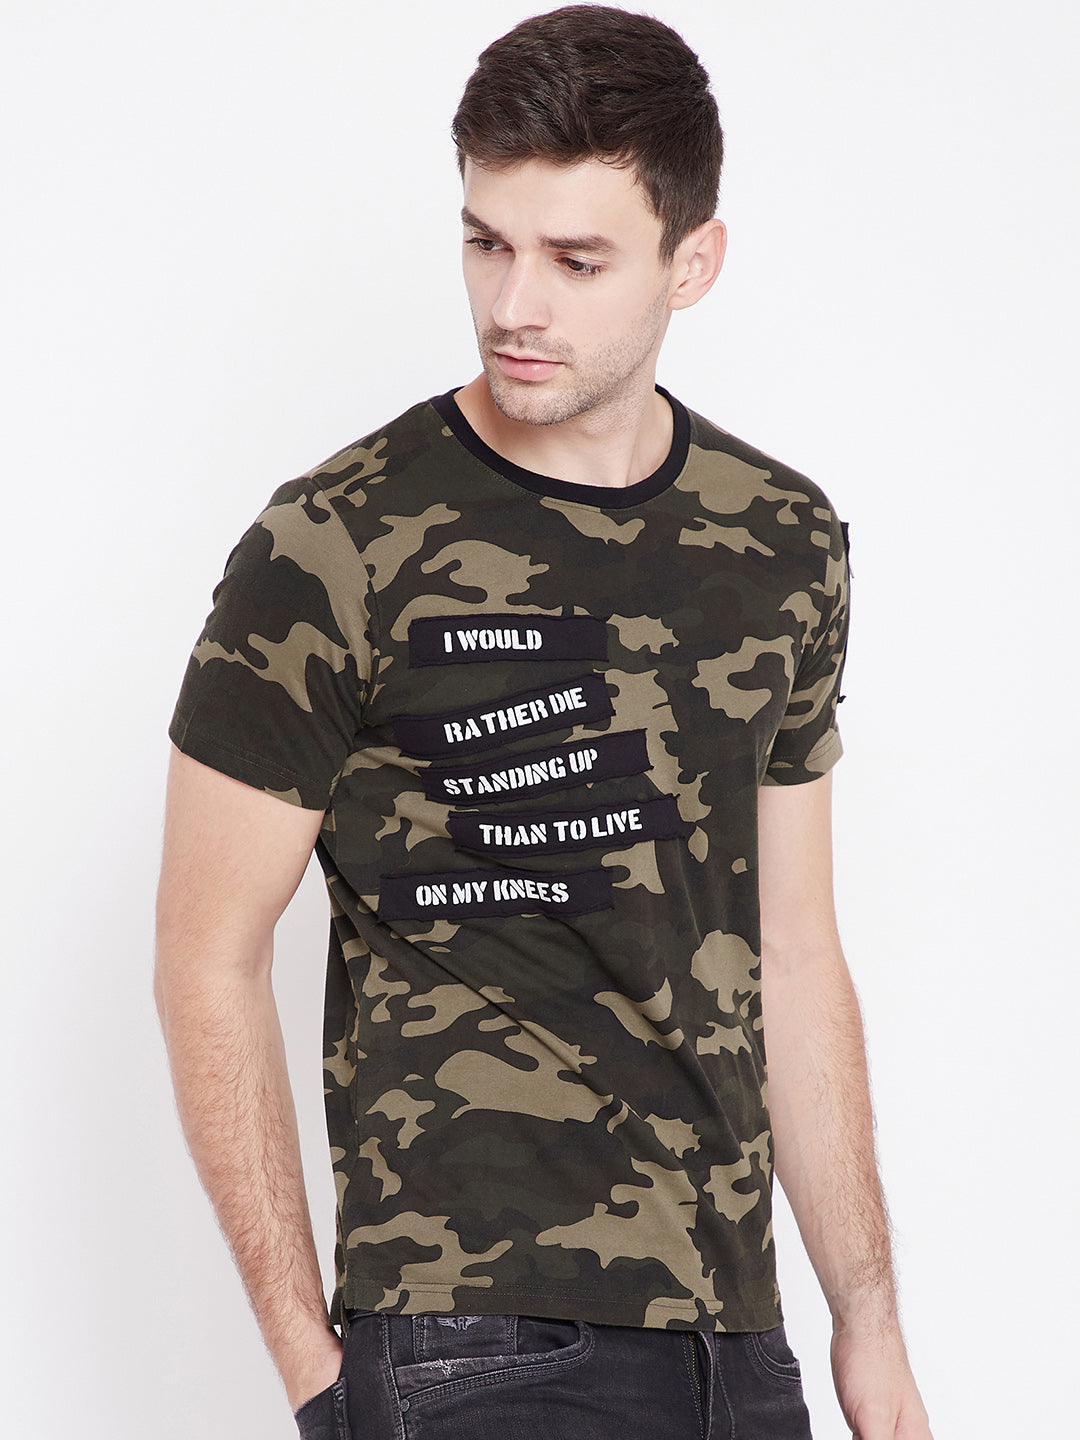 Trendy T-Shirts- Every Man Should Keep In His Wardrobe - Punk